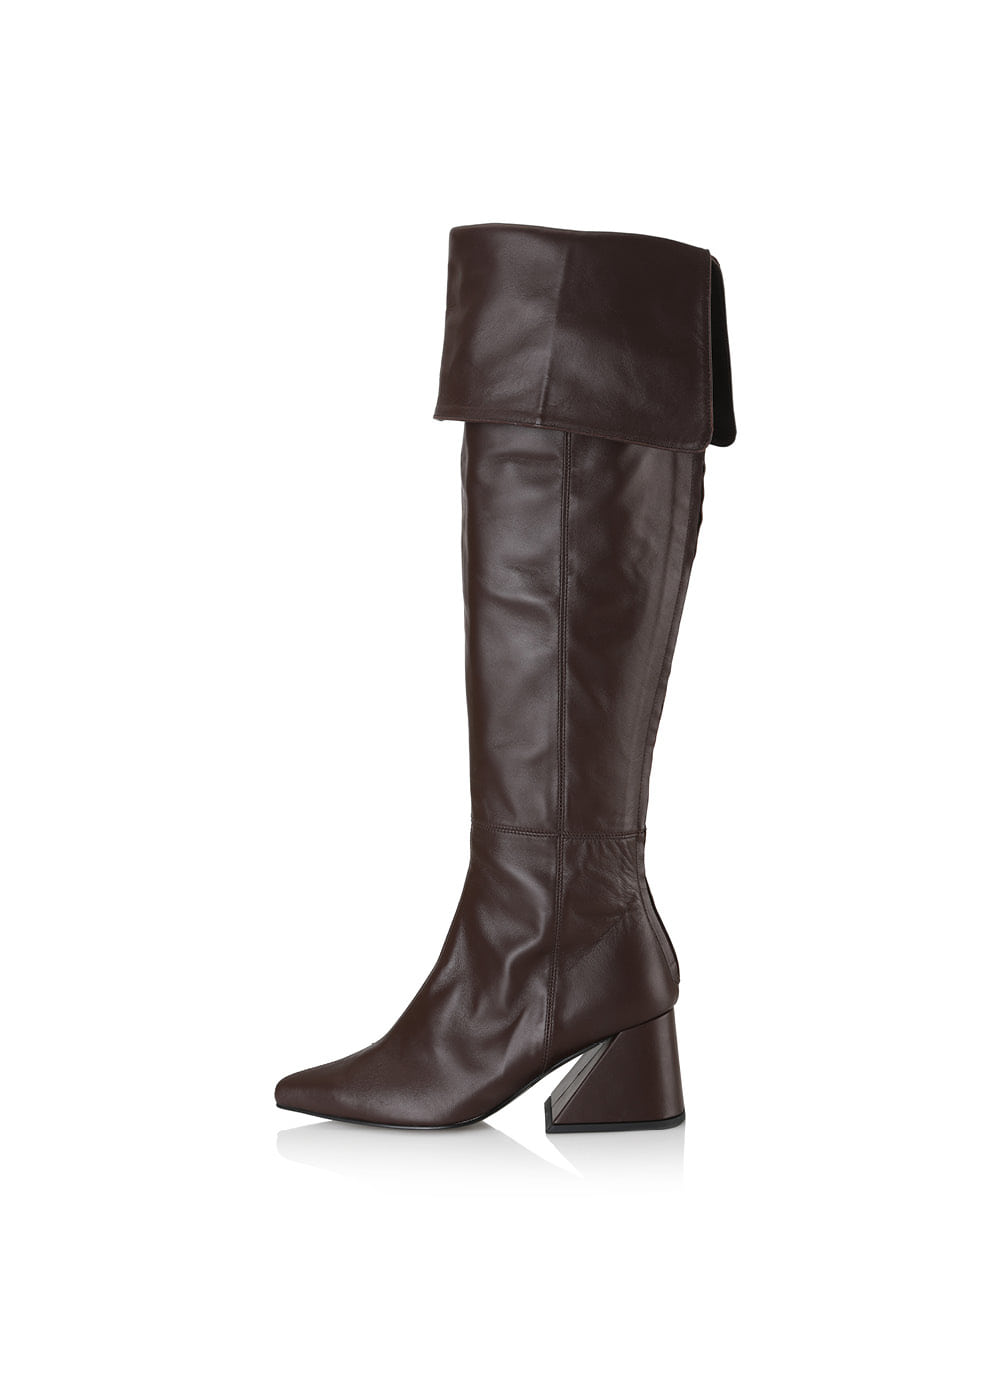 Melody over-the-knee boots / YY9A-B12 / 4 colors